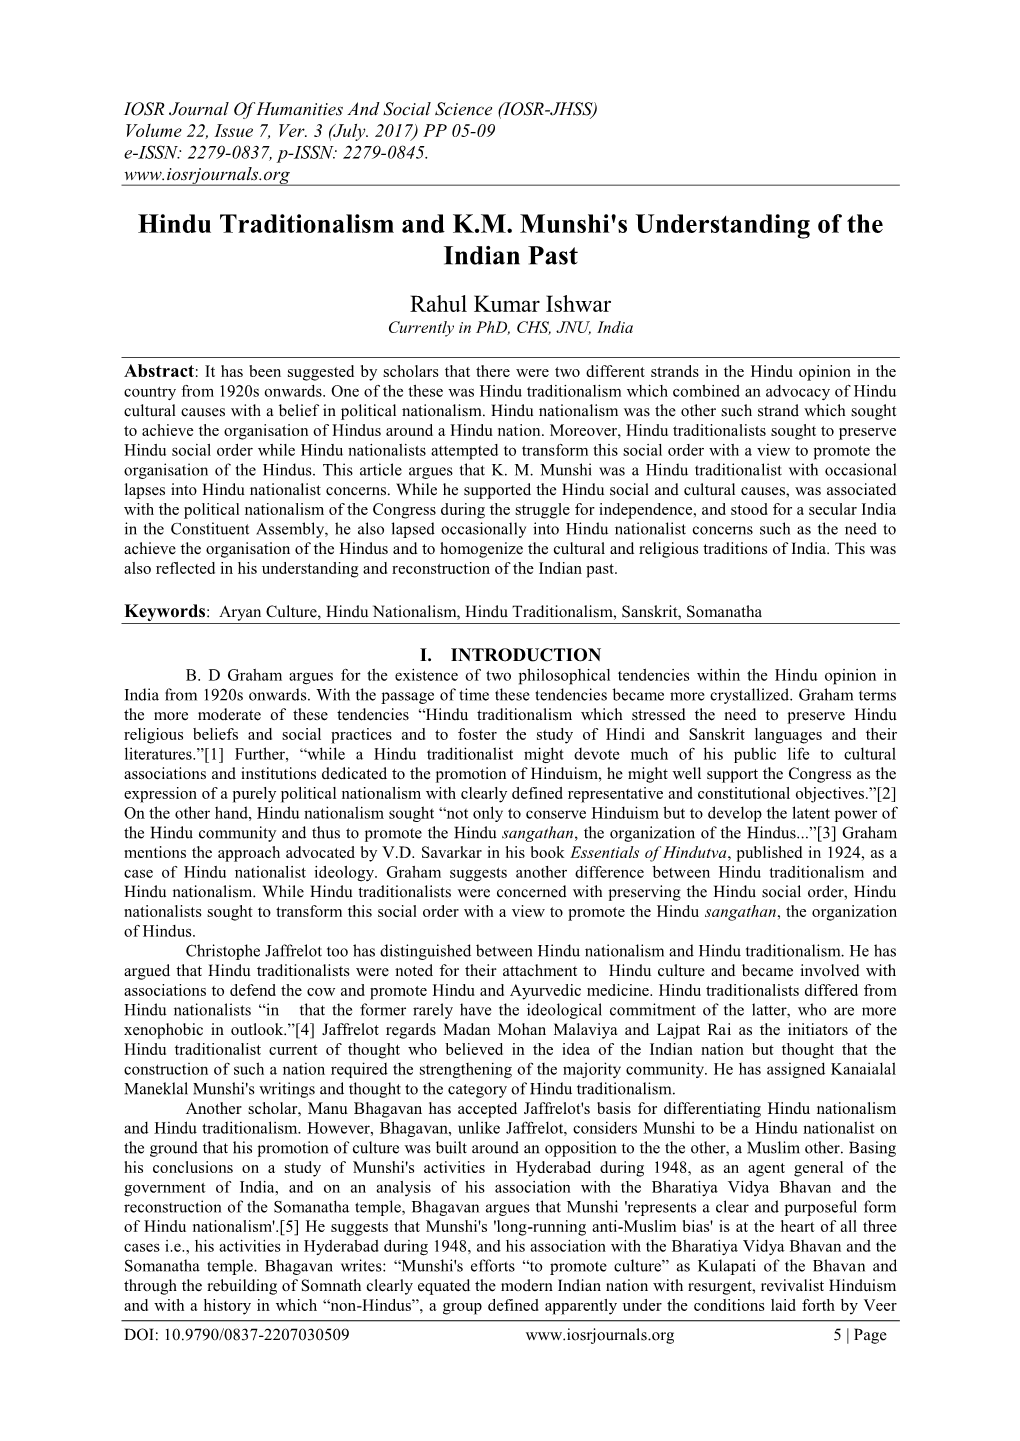 Hindu Traditionalism and K.M. Munshi's Understanding of the Indian Past